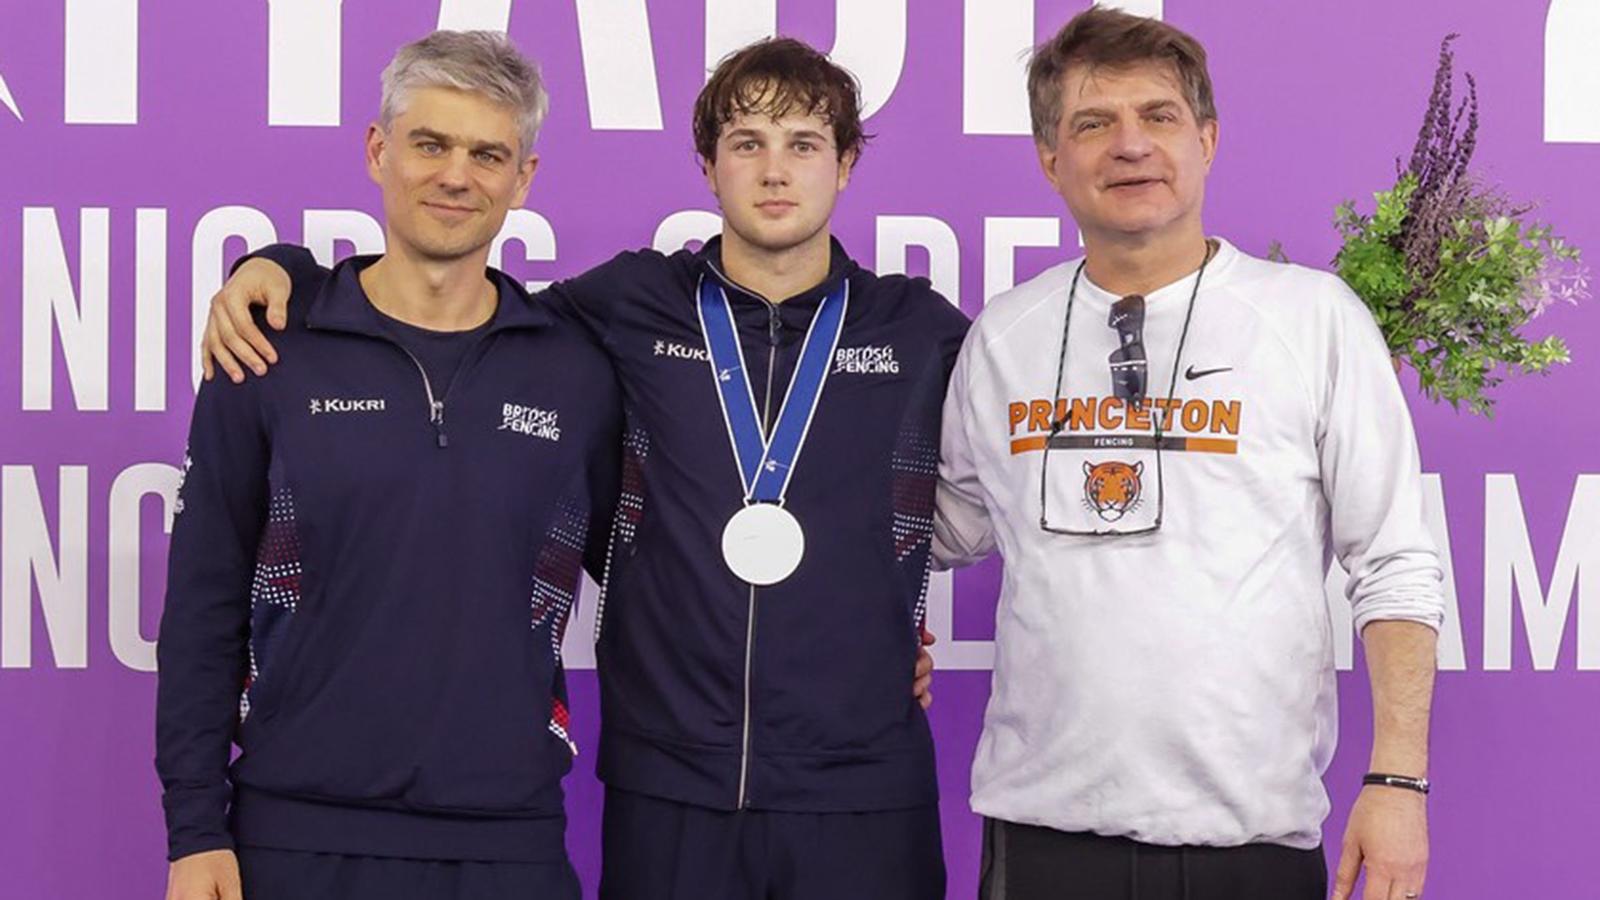 Princeton Fencers Shine at Junior World Championships: Alec Brooke Wins Silver Medal in Épée and Tatiana Nazlymov Qualifies for Olympics